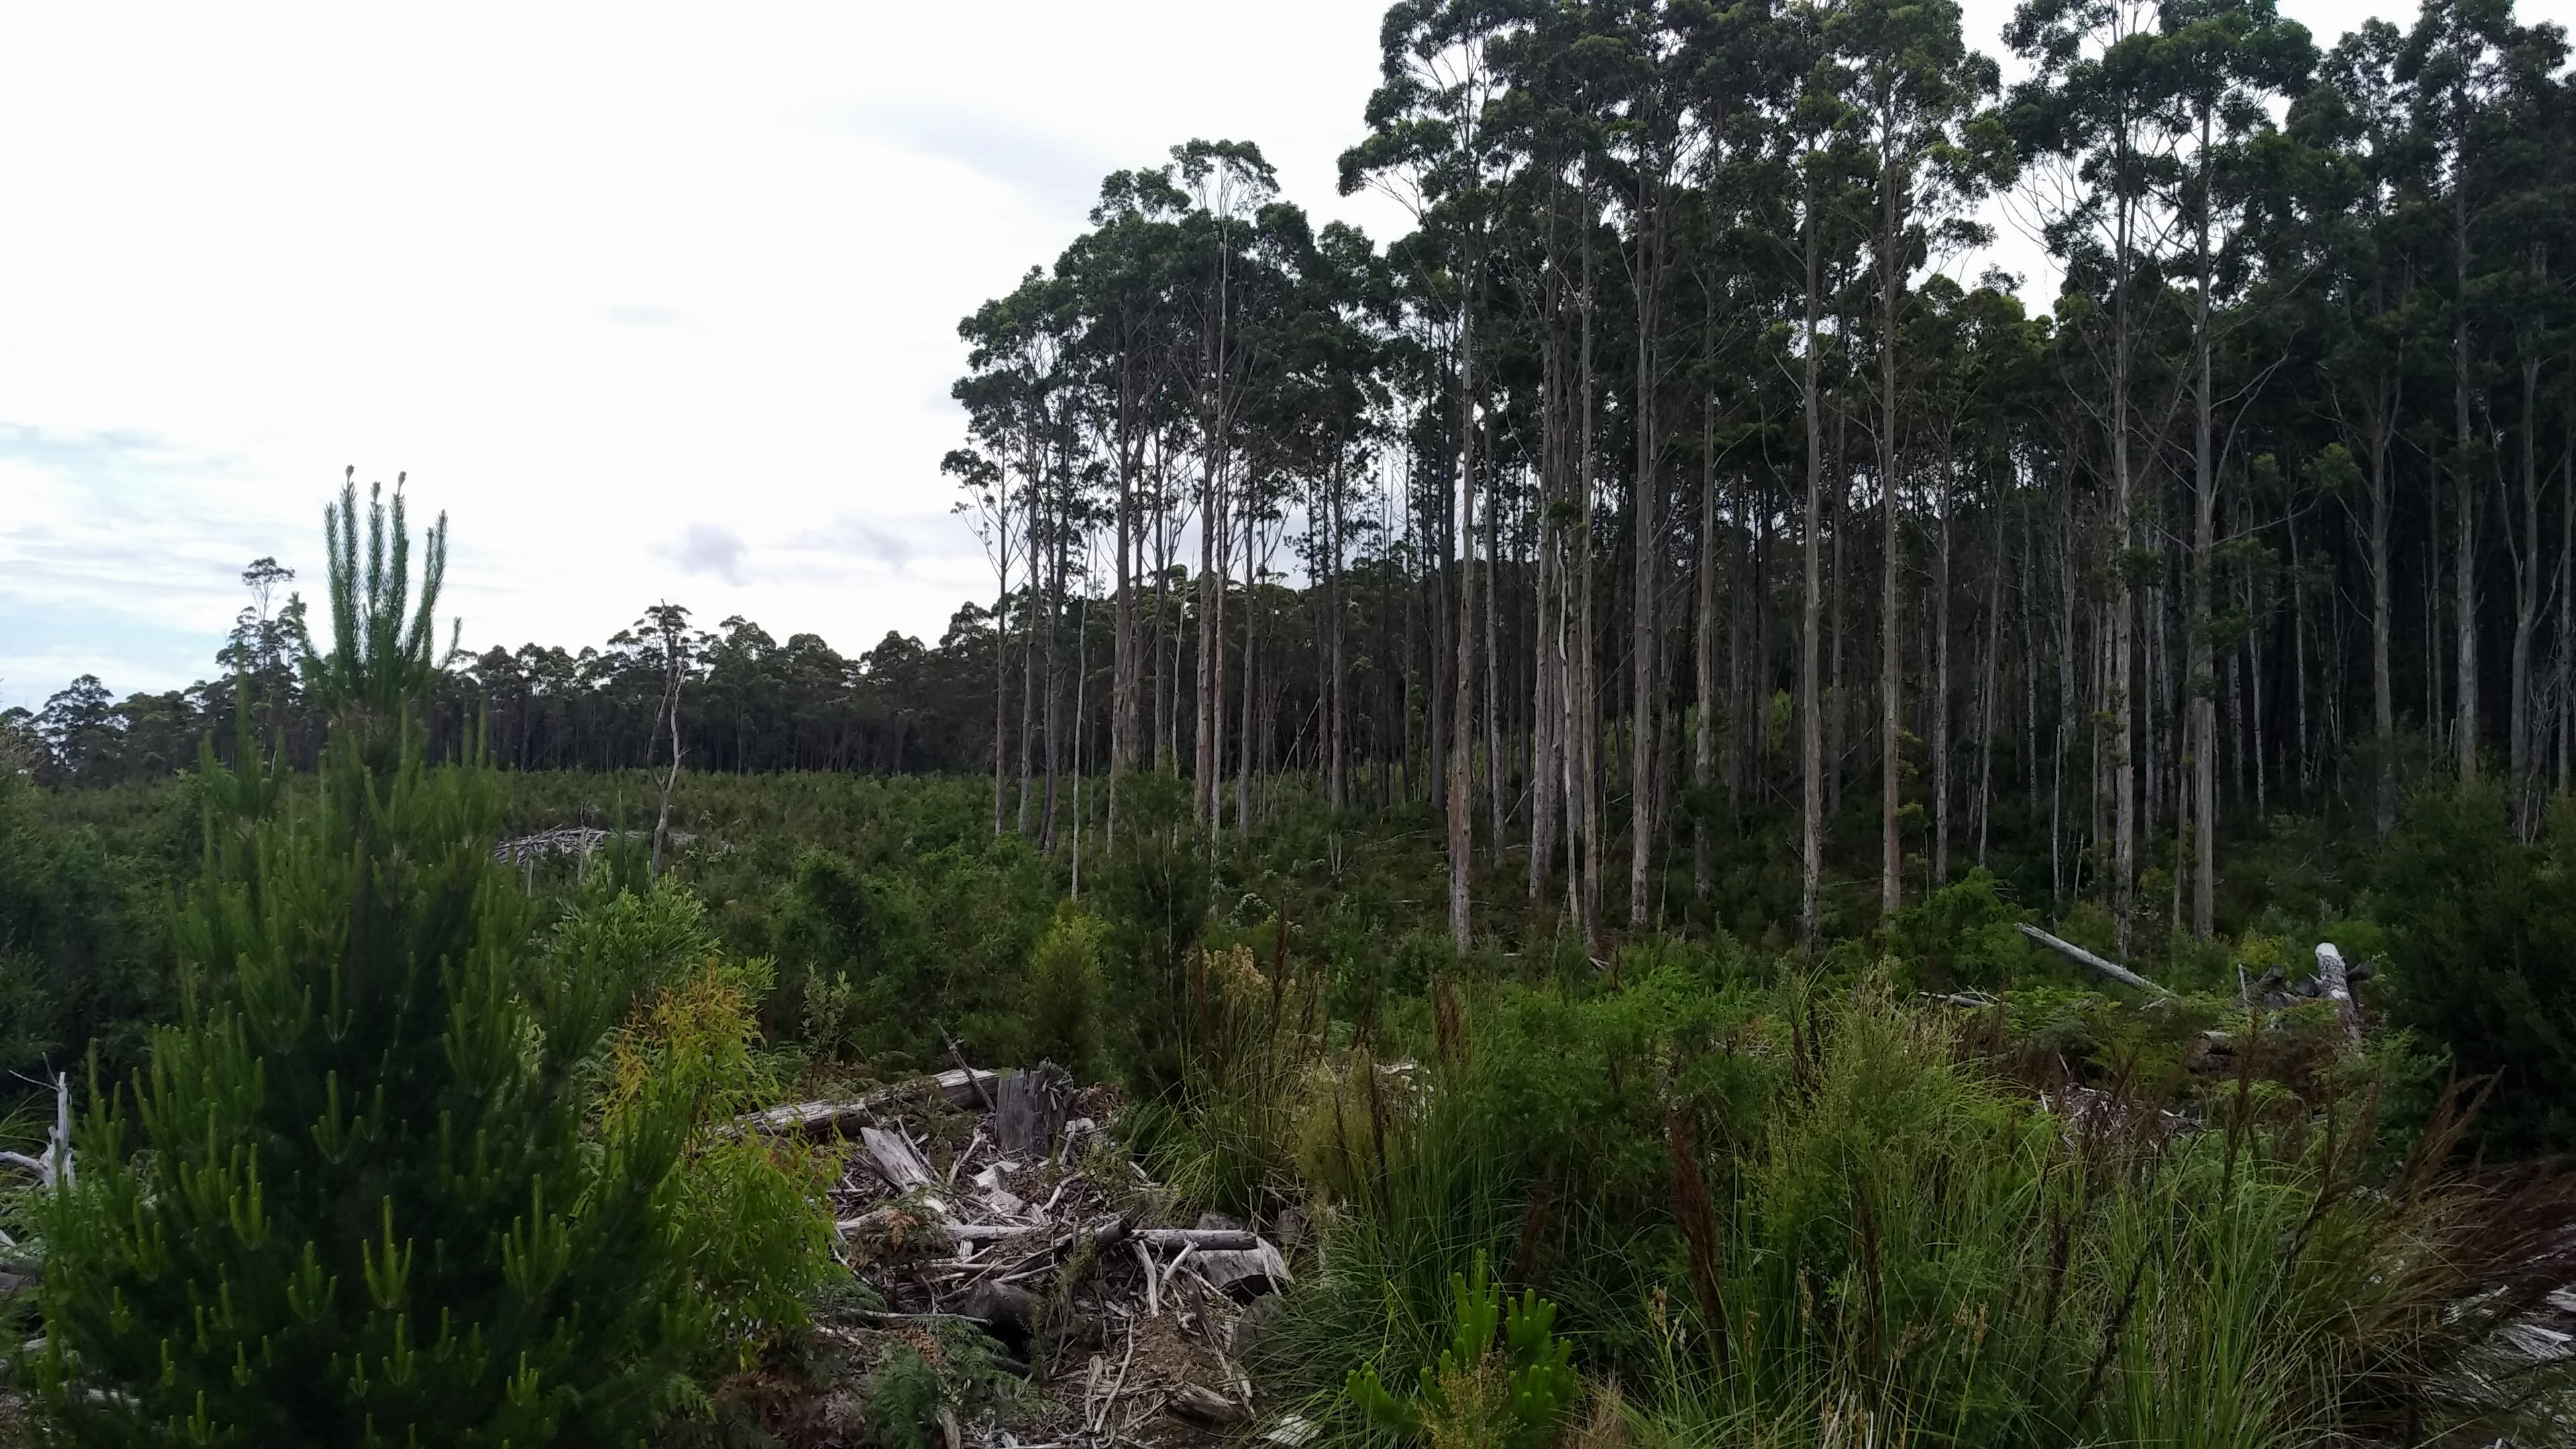 Some young blue gums on the edge of the logged plantation